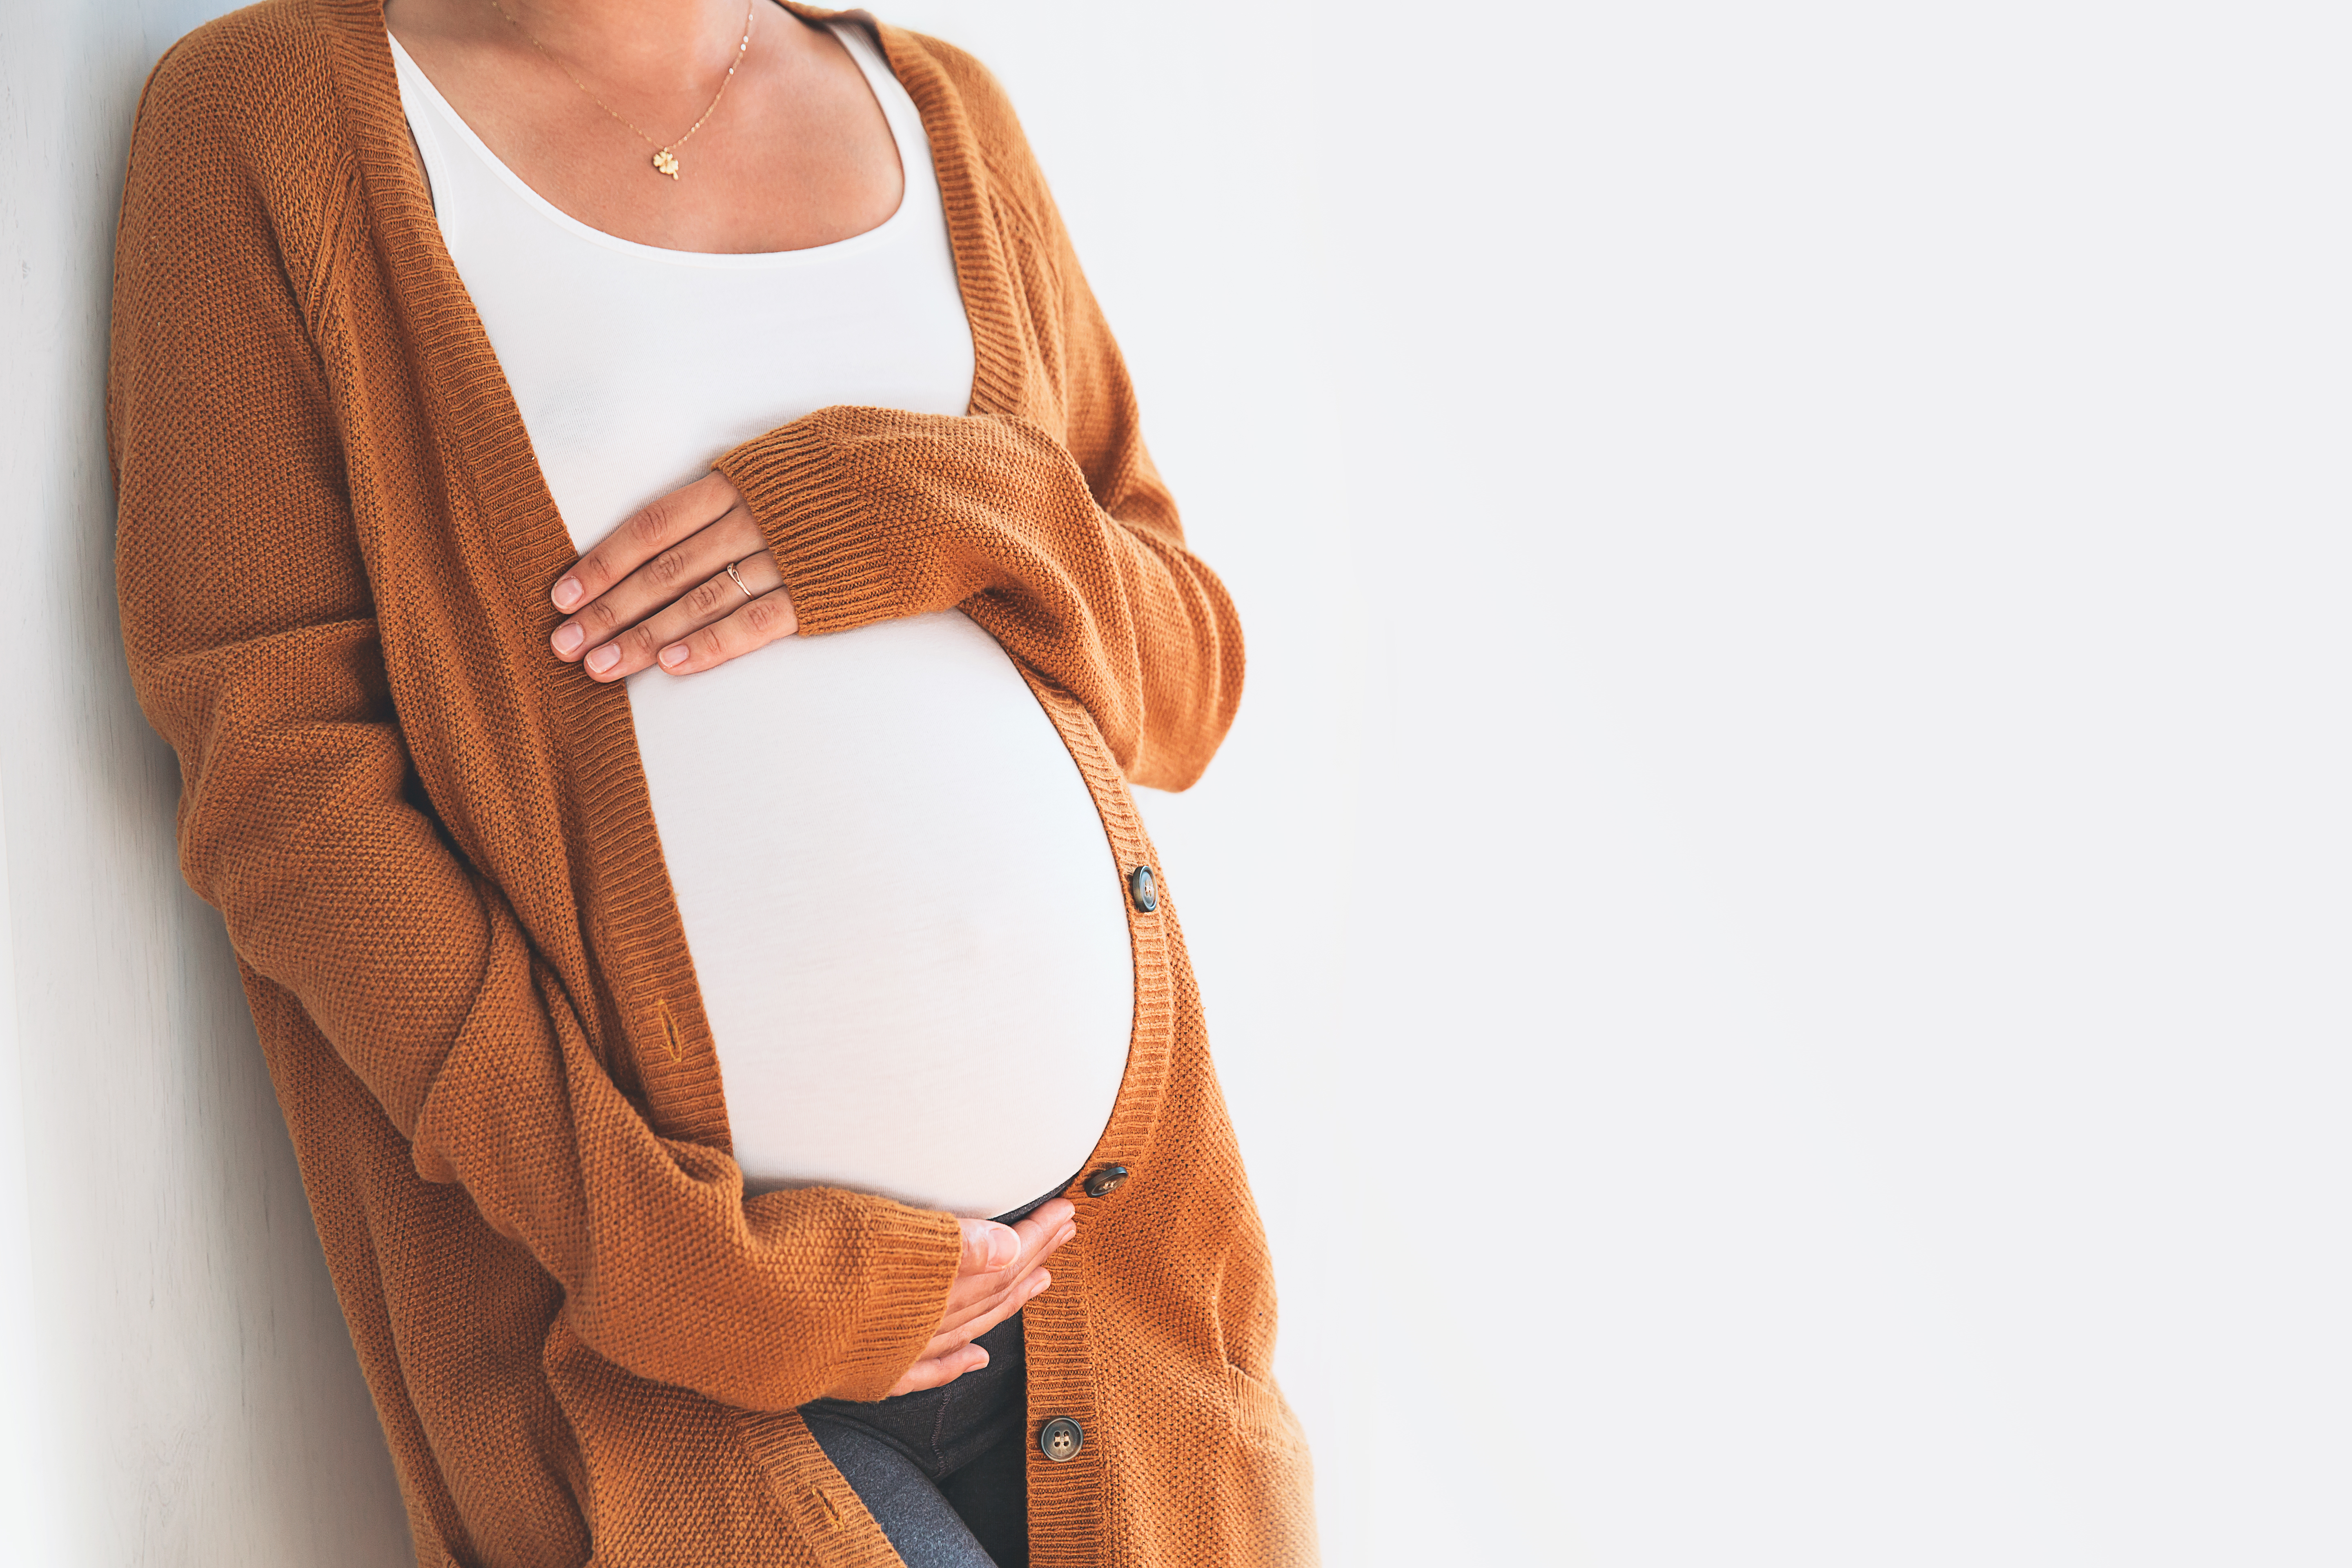 Short-Term Maternal Infection During Pregnancy May Cause Autism: Israeli Research